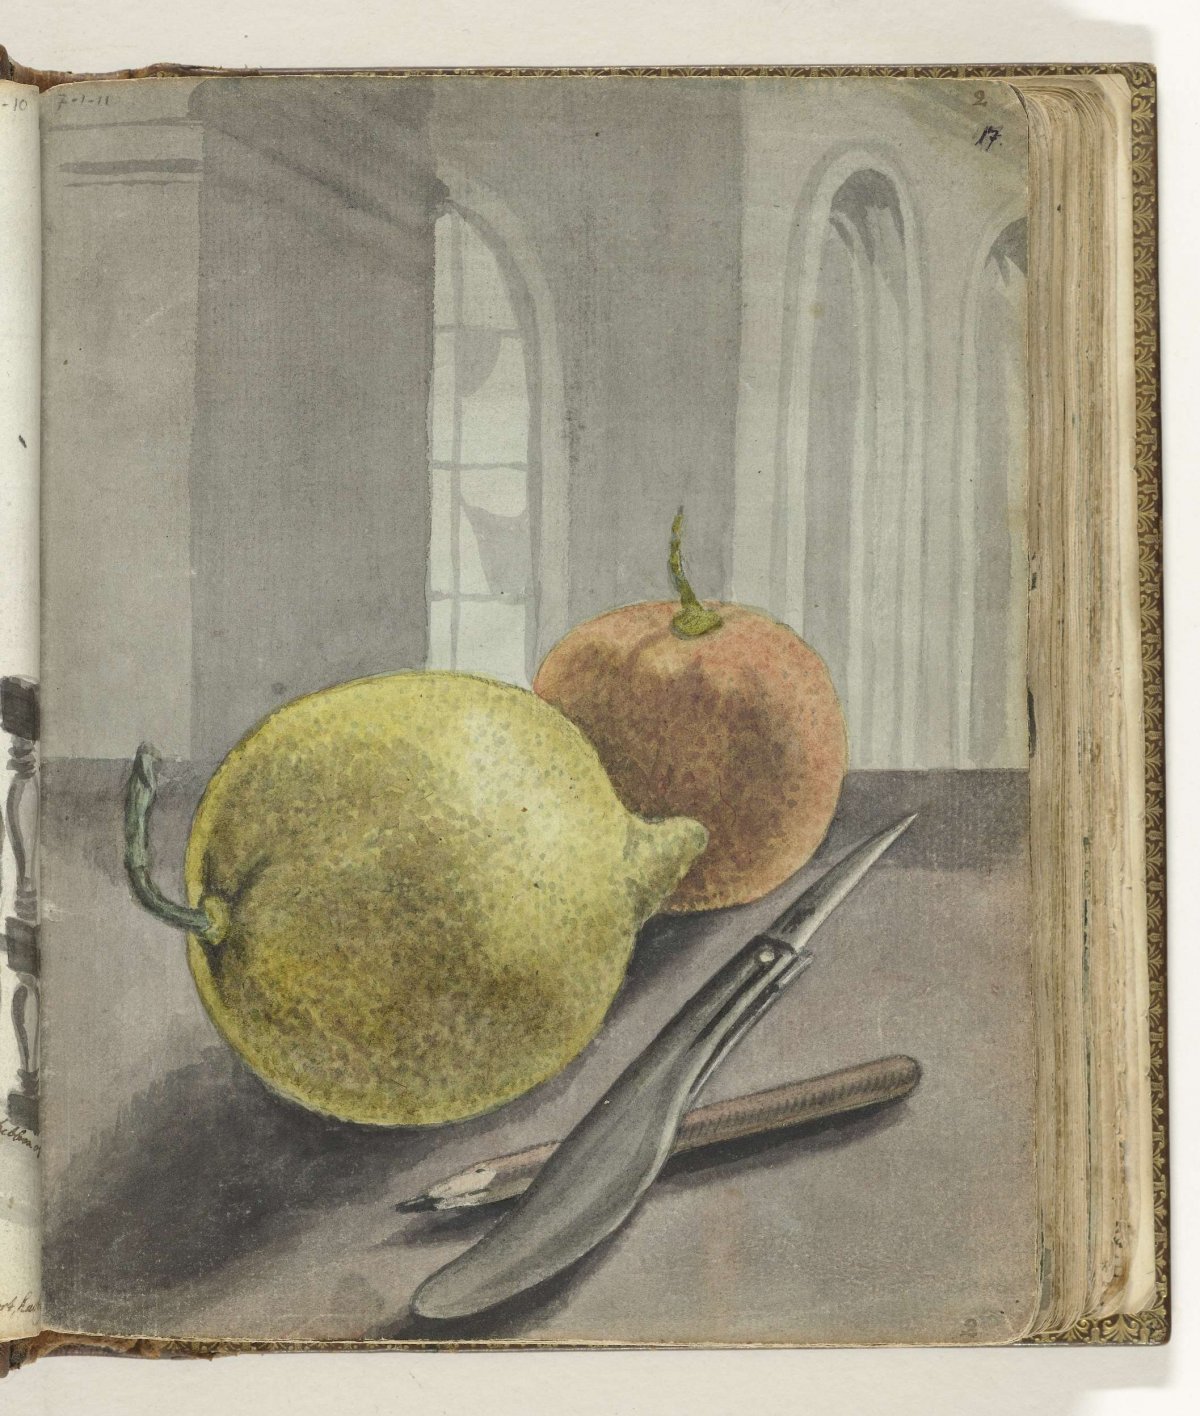 Still life with fruit, knife and pencil., Jan Brandes, 1779 - 1785